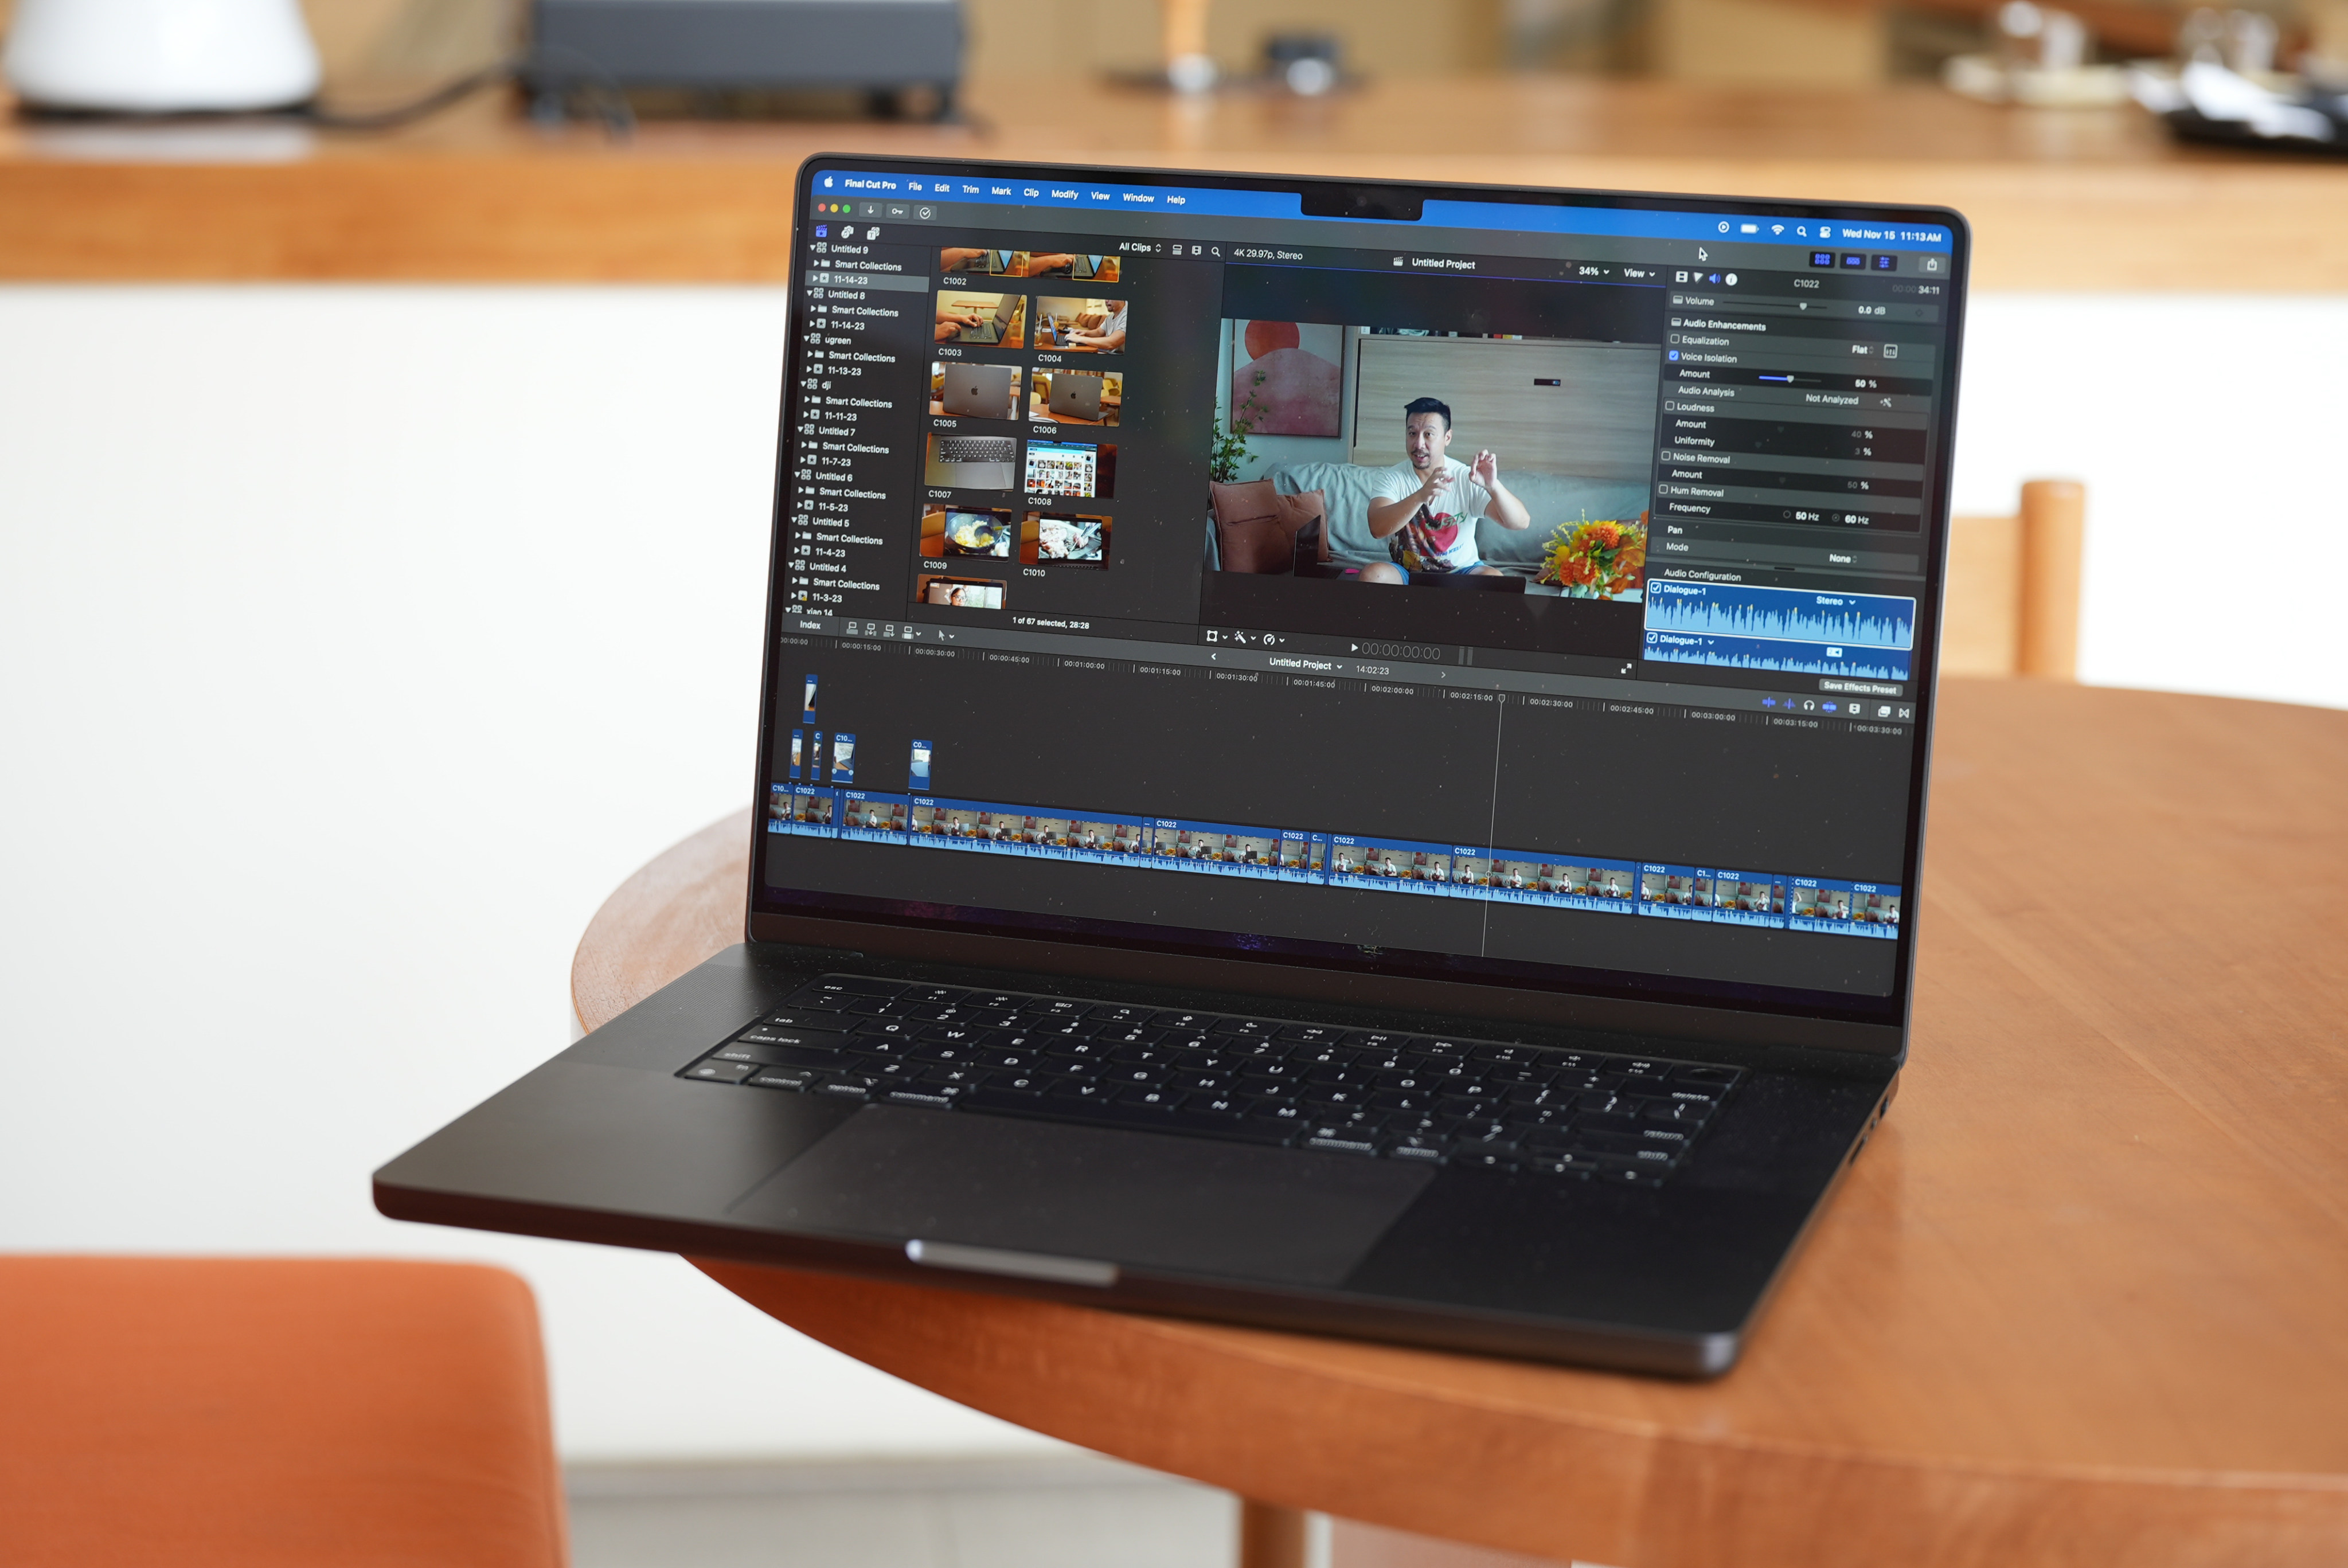 The M3 Max MacBook Pro (above) has surpassed the M2 Max’s processing power, graphics, audio and battery life, and leads the market in laptop CPUs and GPUs, as well as outperforming many PCs. Photo: Ben Sin